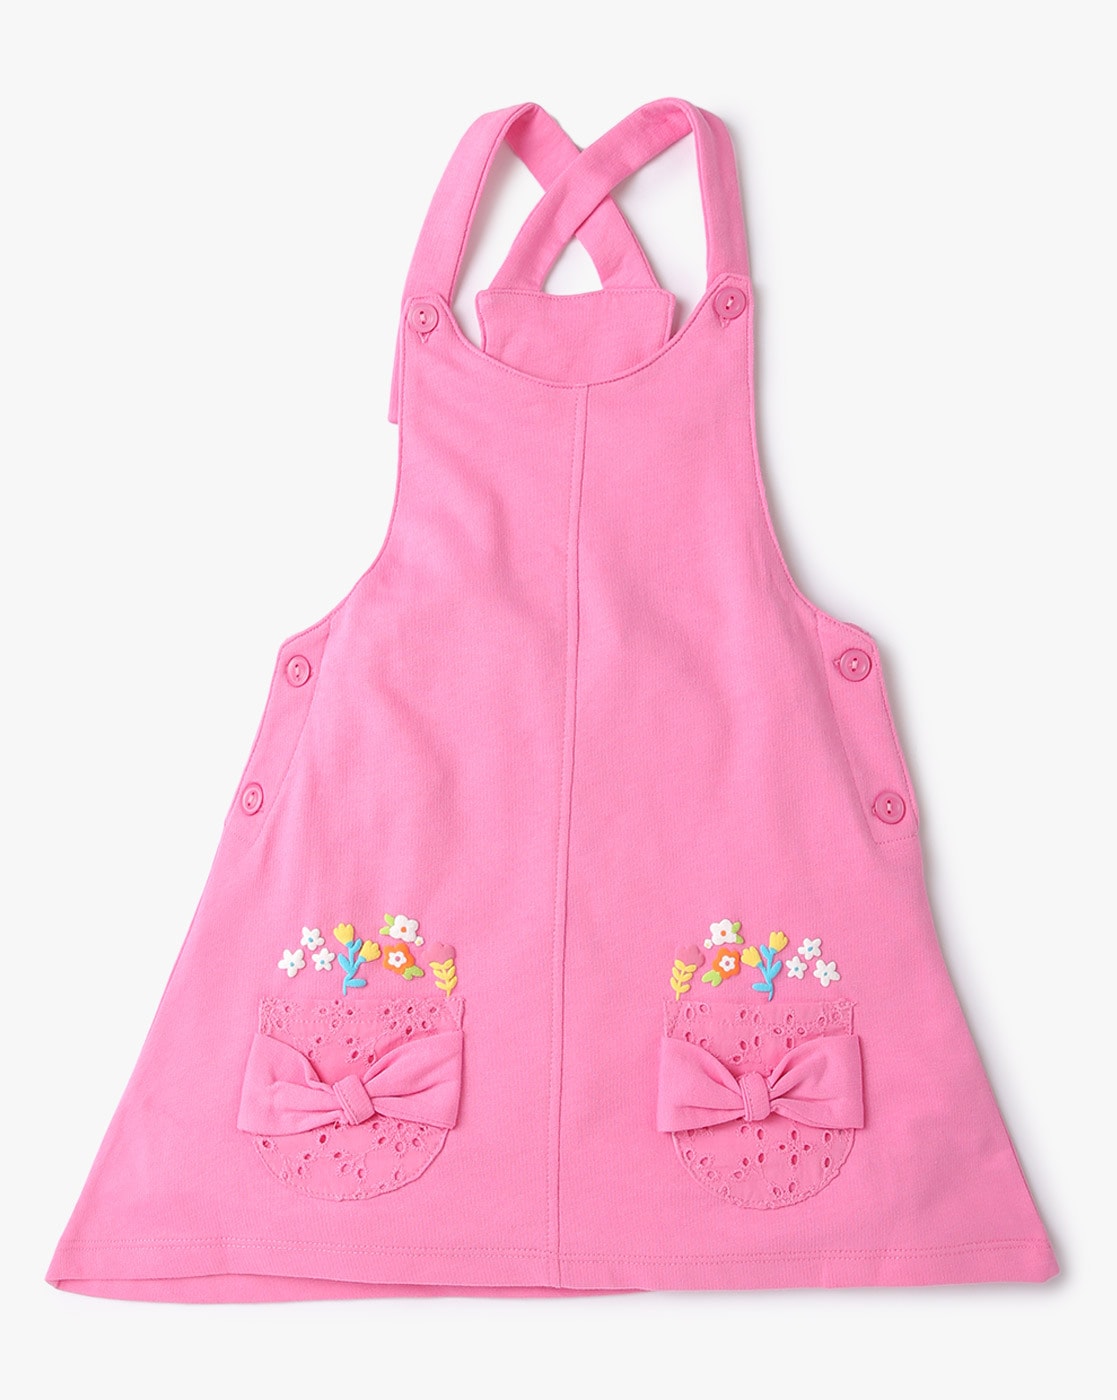 Update more than 106 pink dungaree dress latest